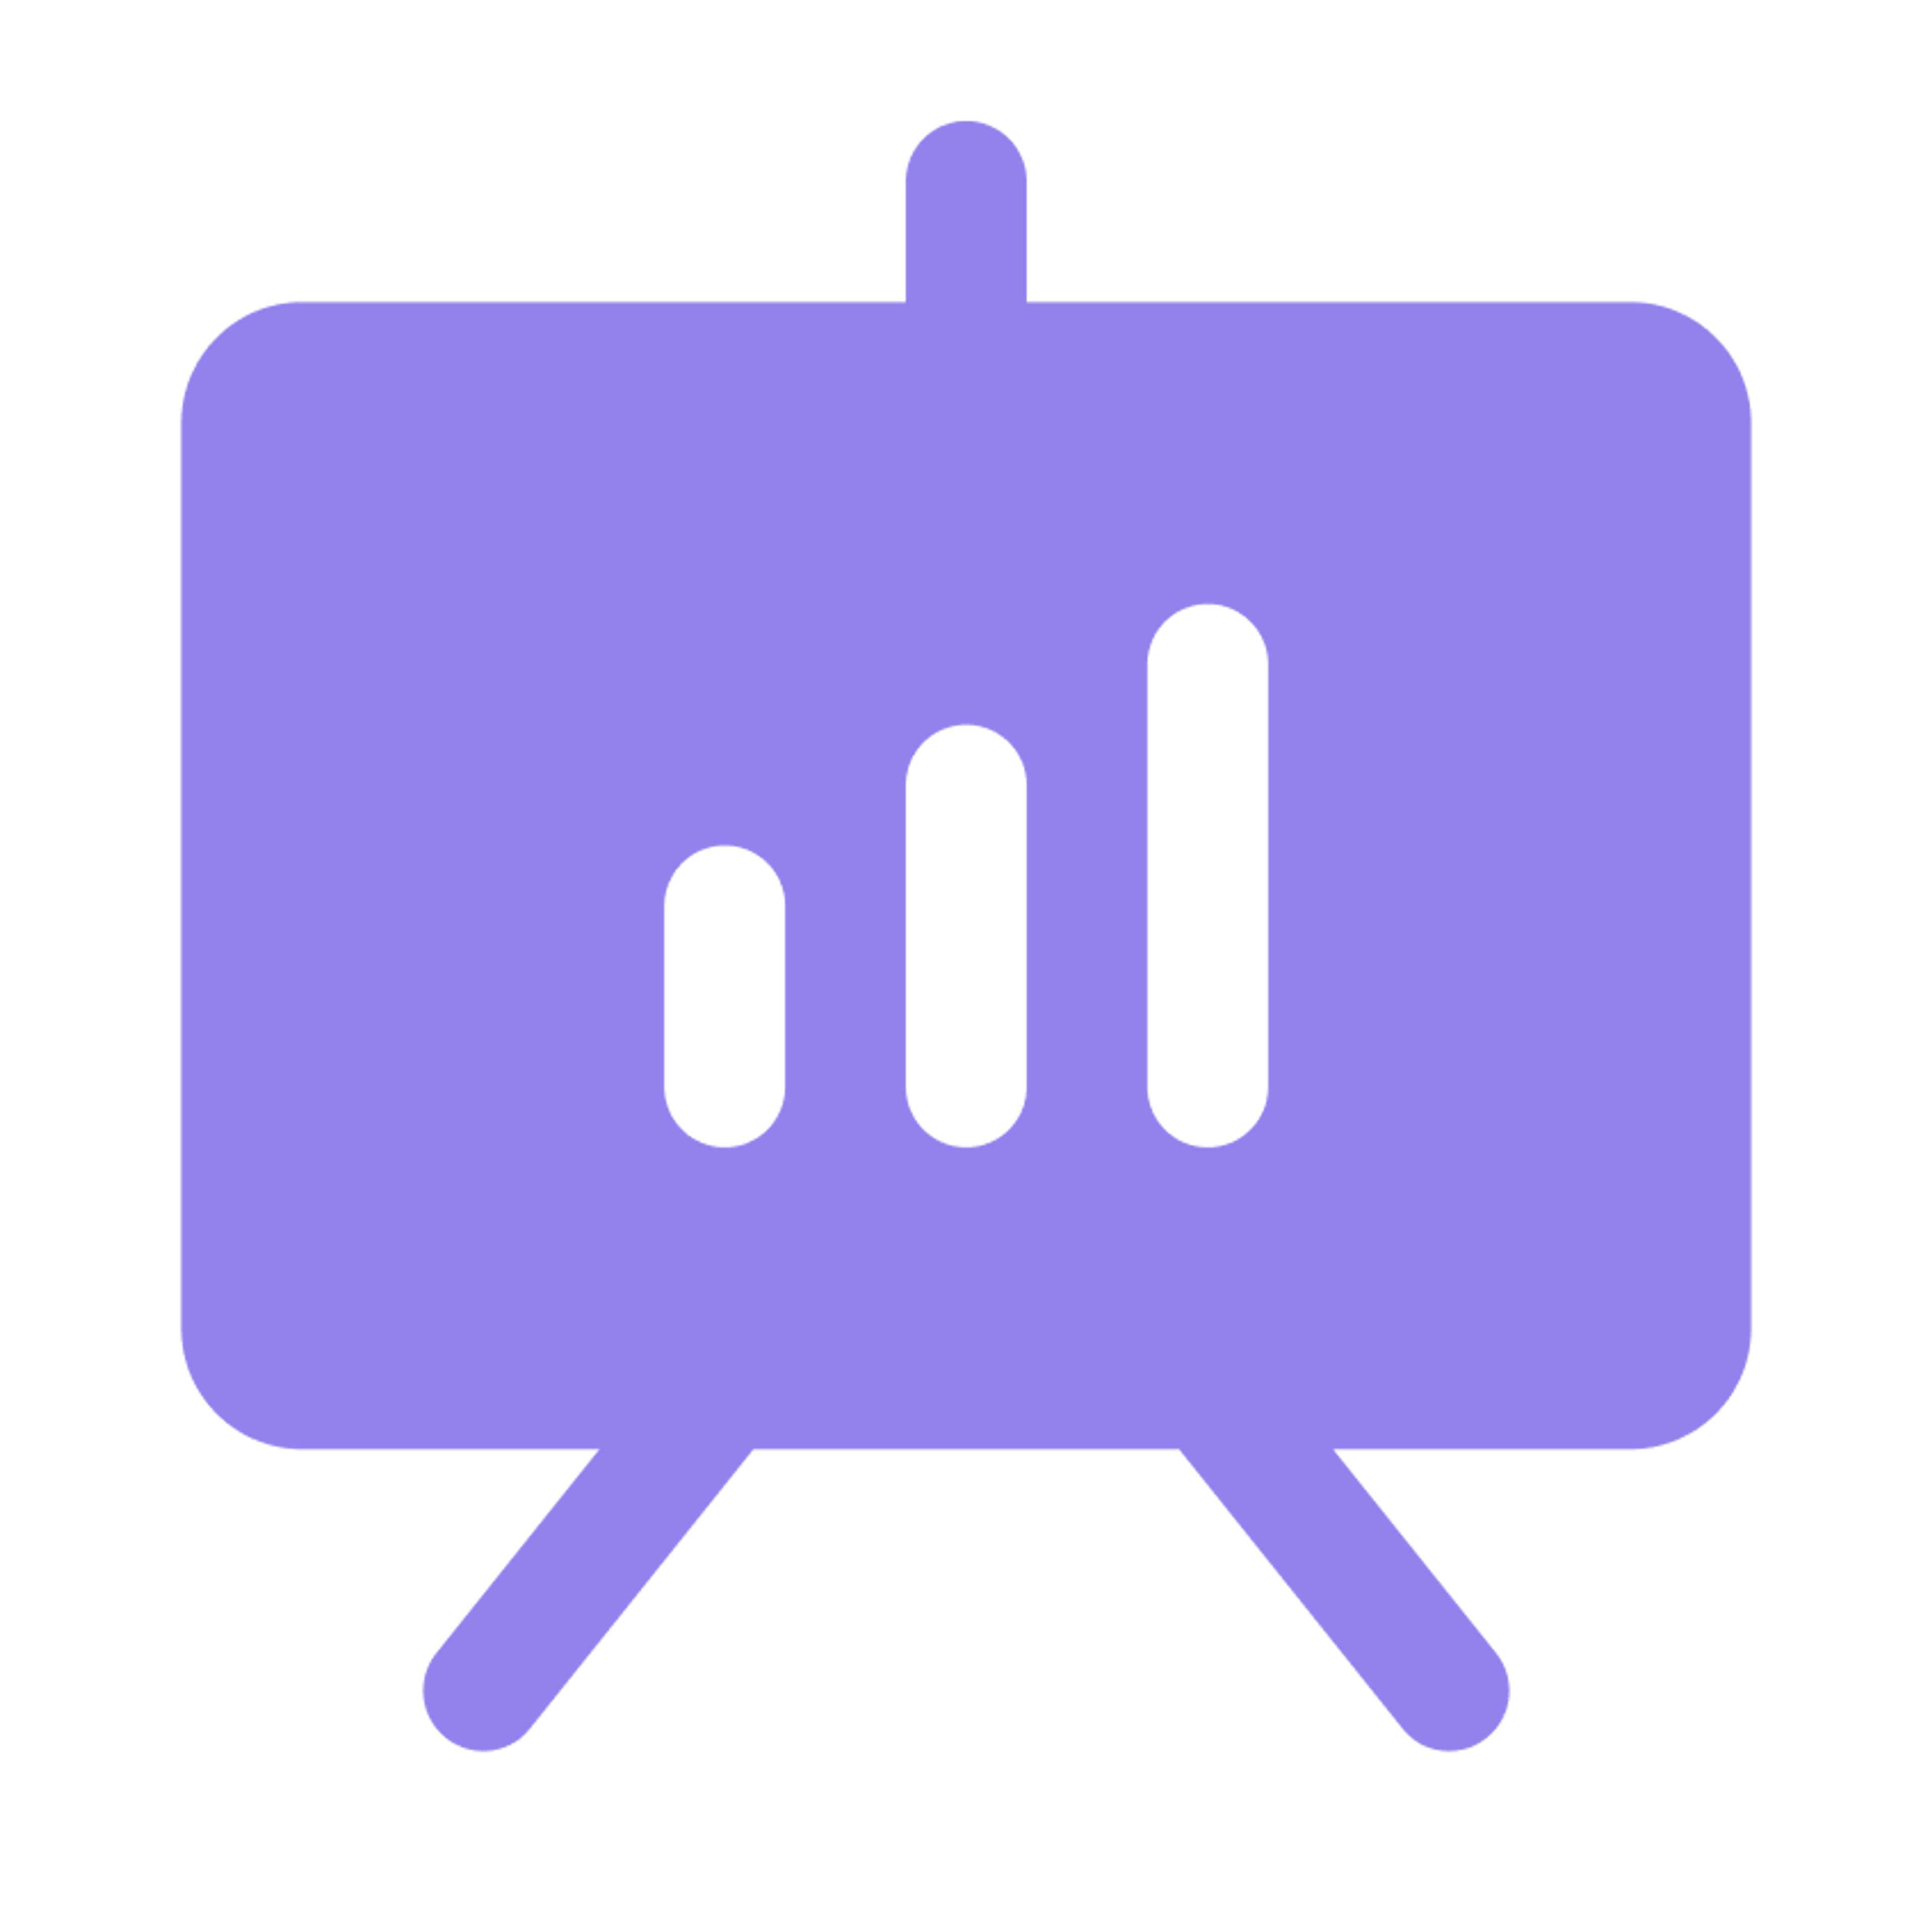 A purple icon of a presentation board on a transparent background